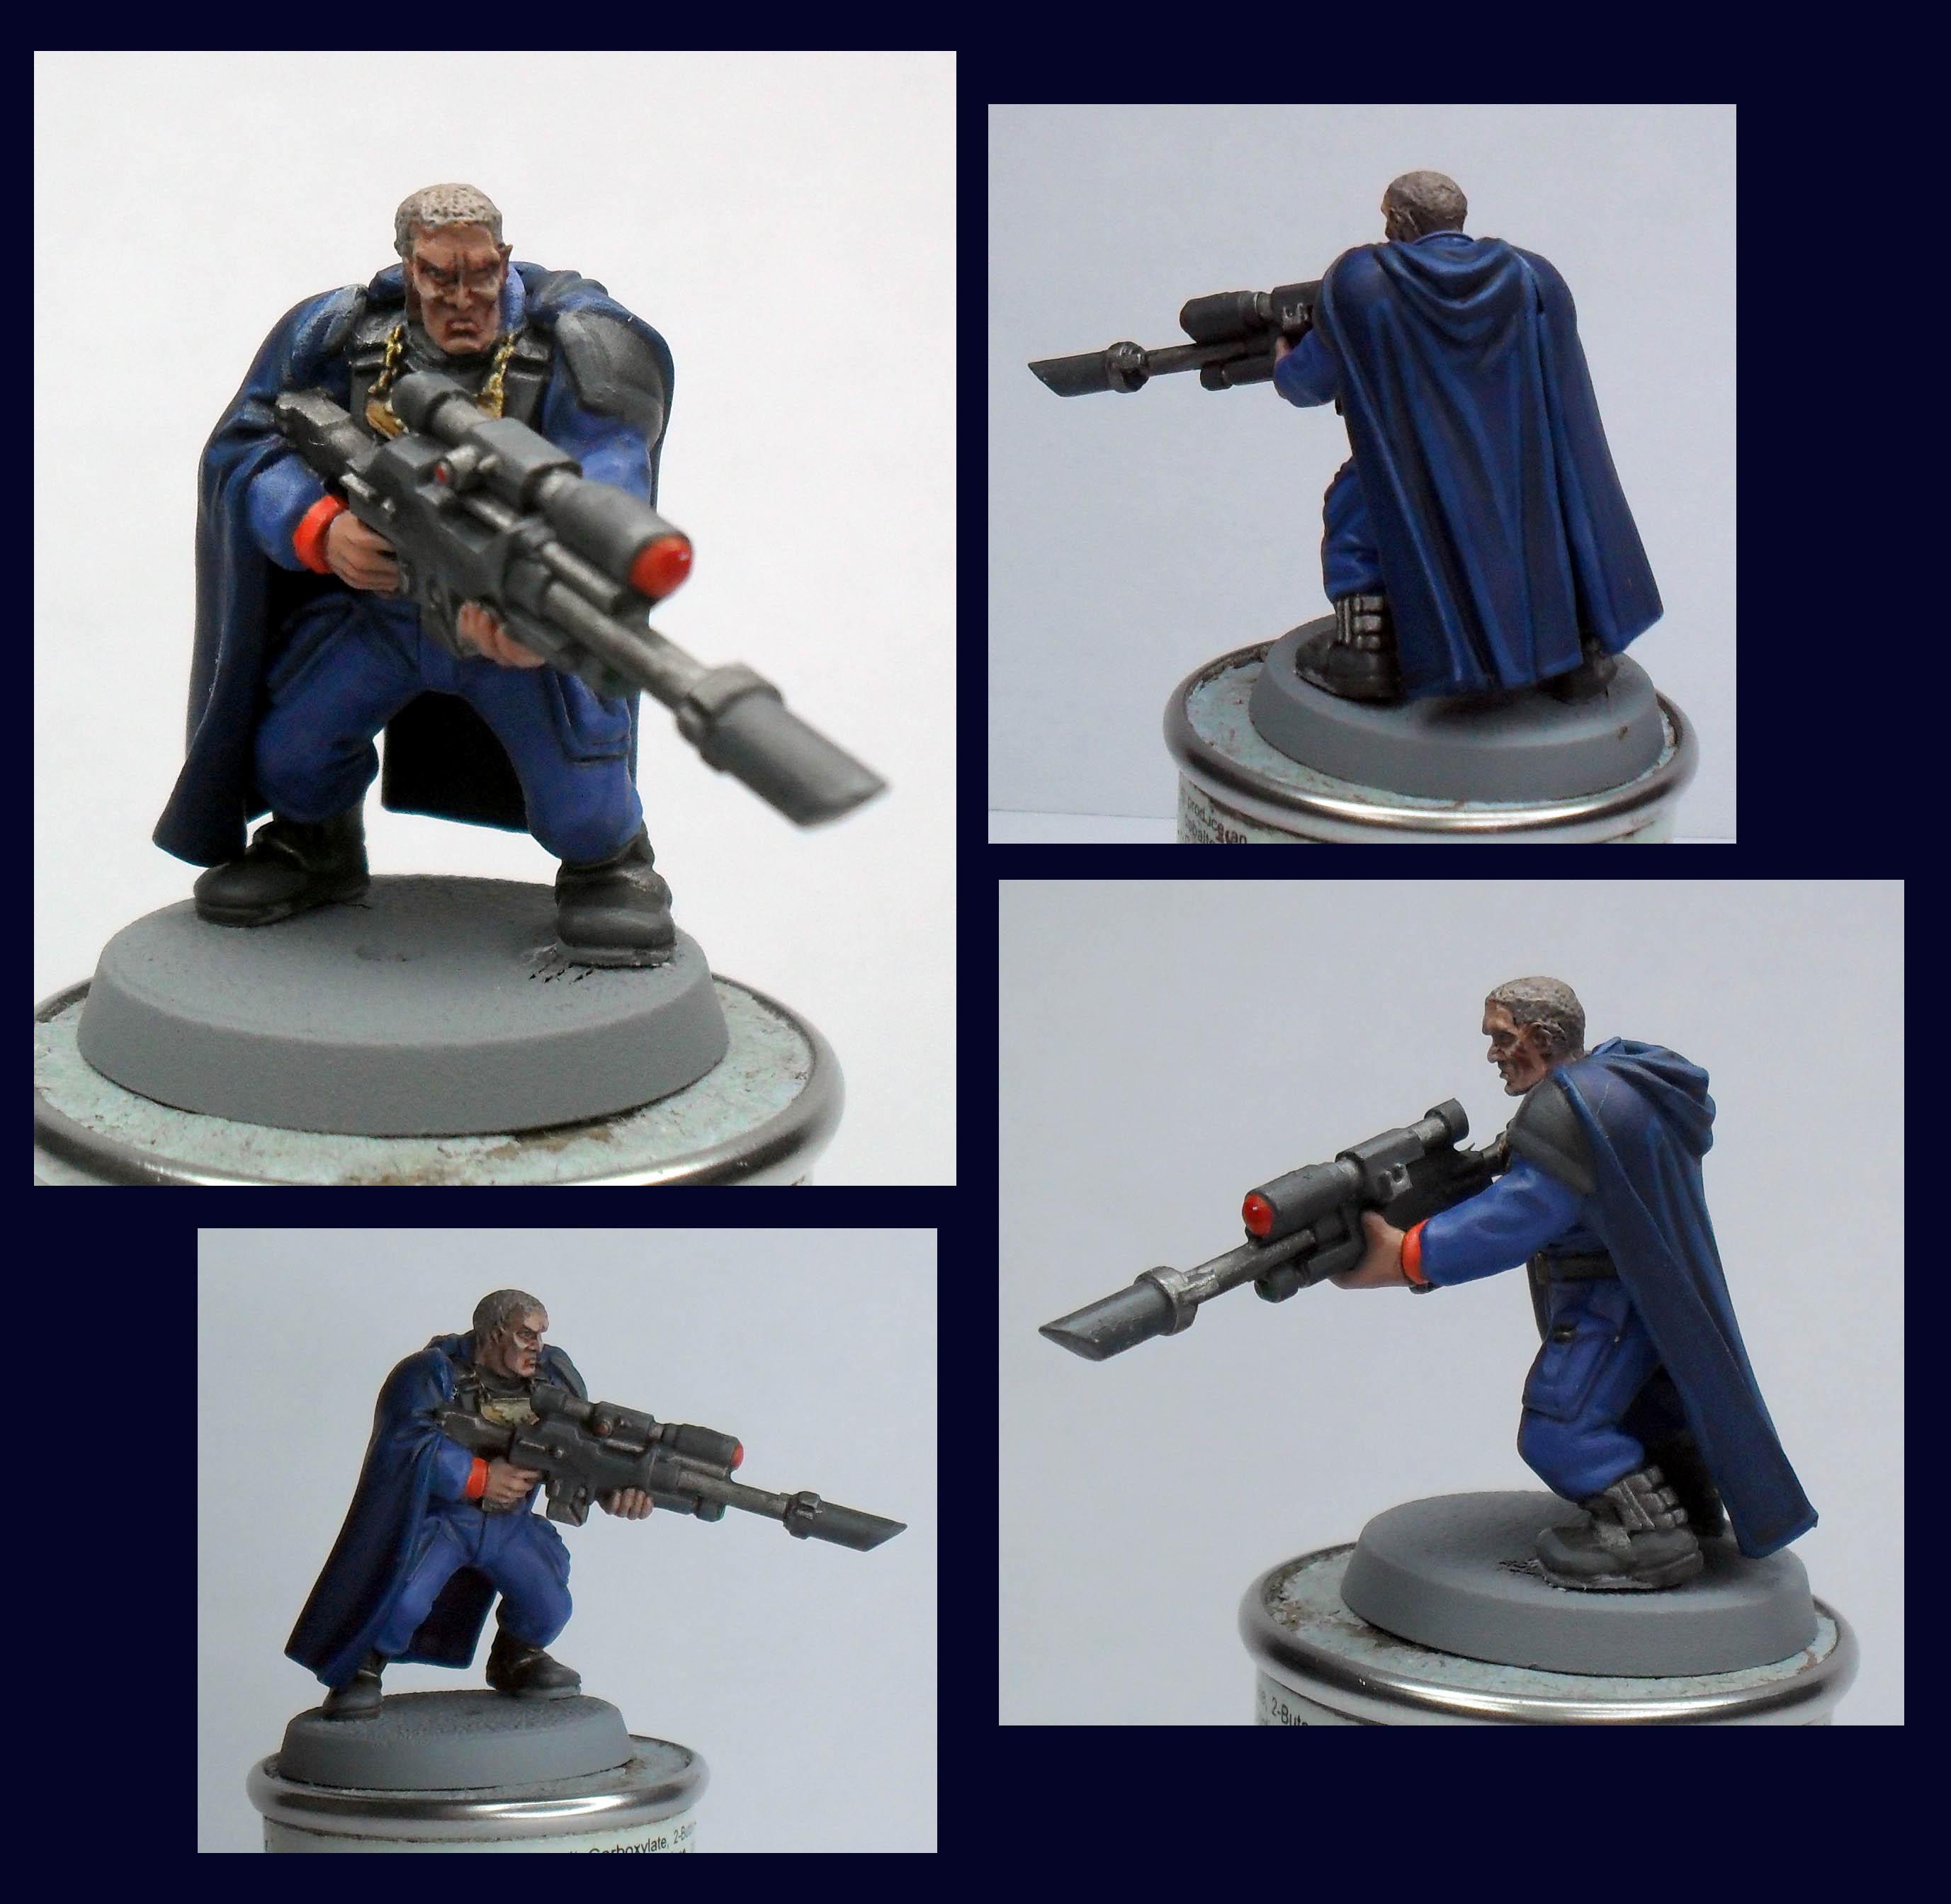 Imperial Guard, Mordian, Snipers, Warhammer 40,000